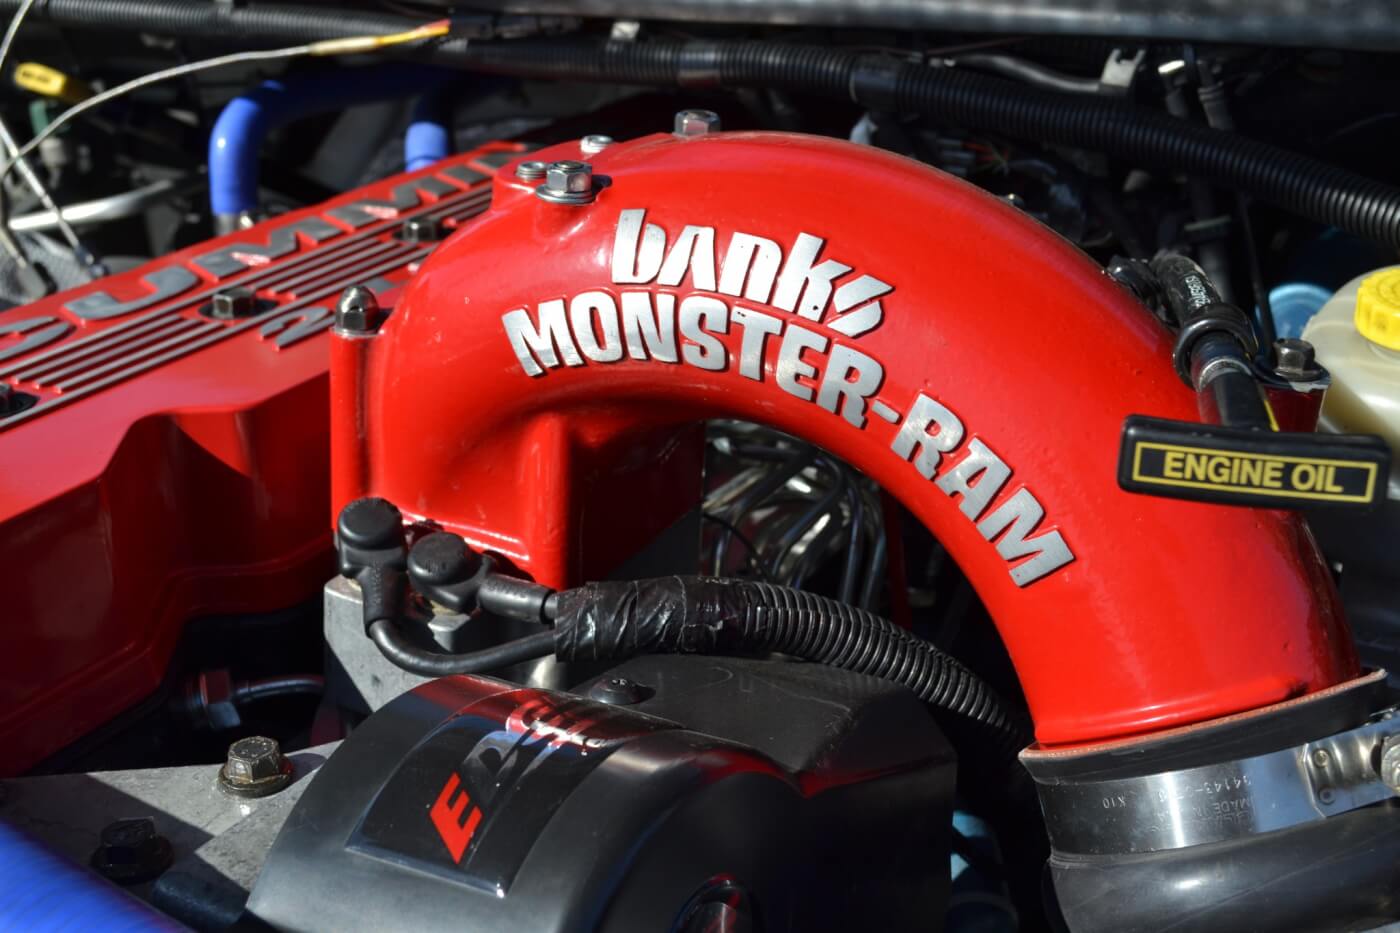 In addition to the intake and exhaust upgrades, airflow into the engine has been improved as well, with the addition of a Banks Monster-Ram intake horn.